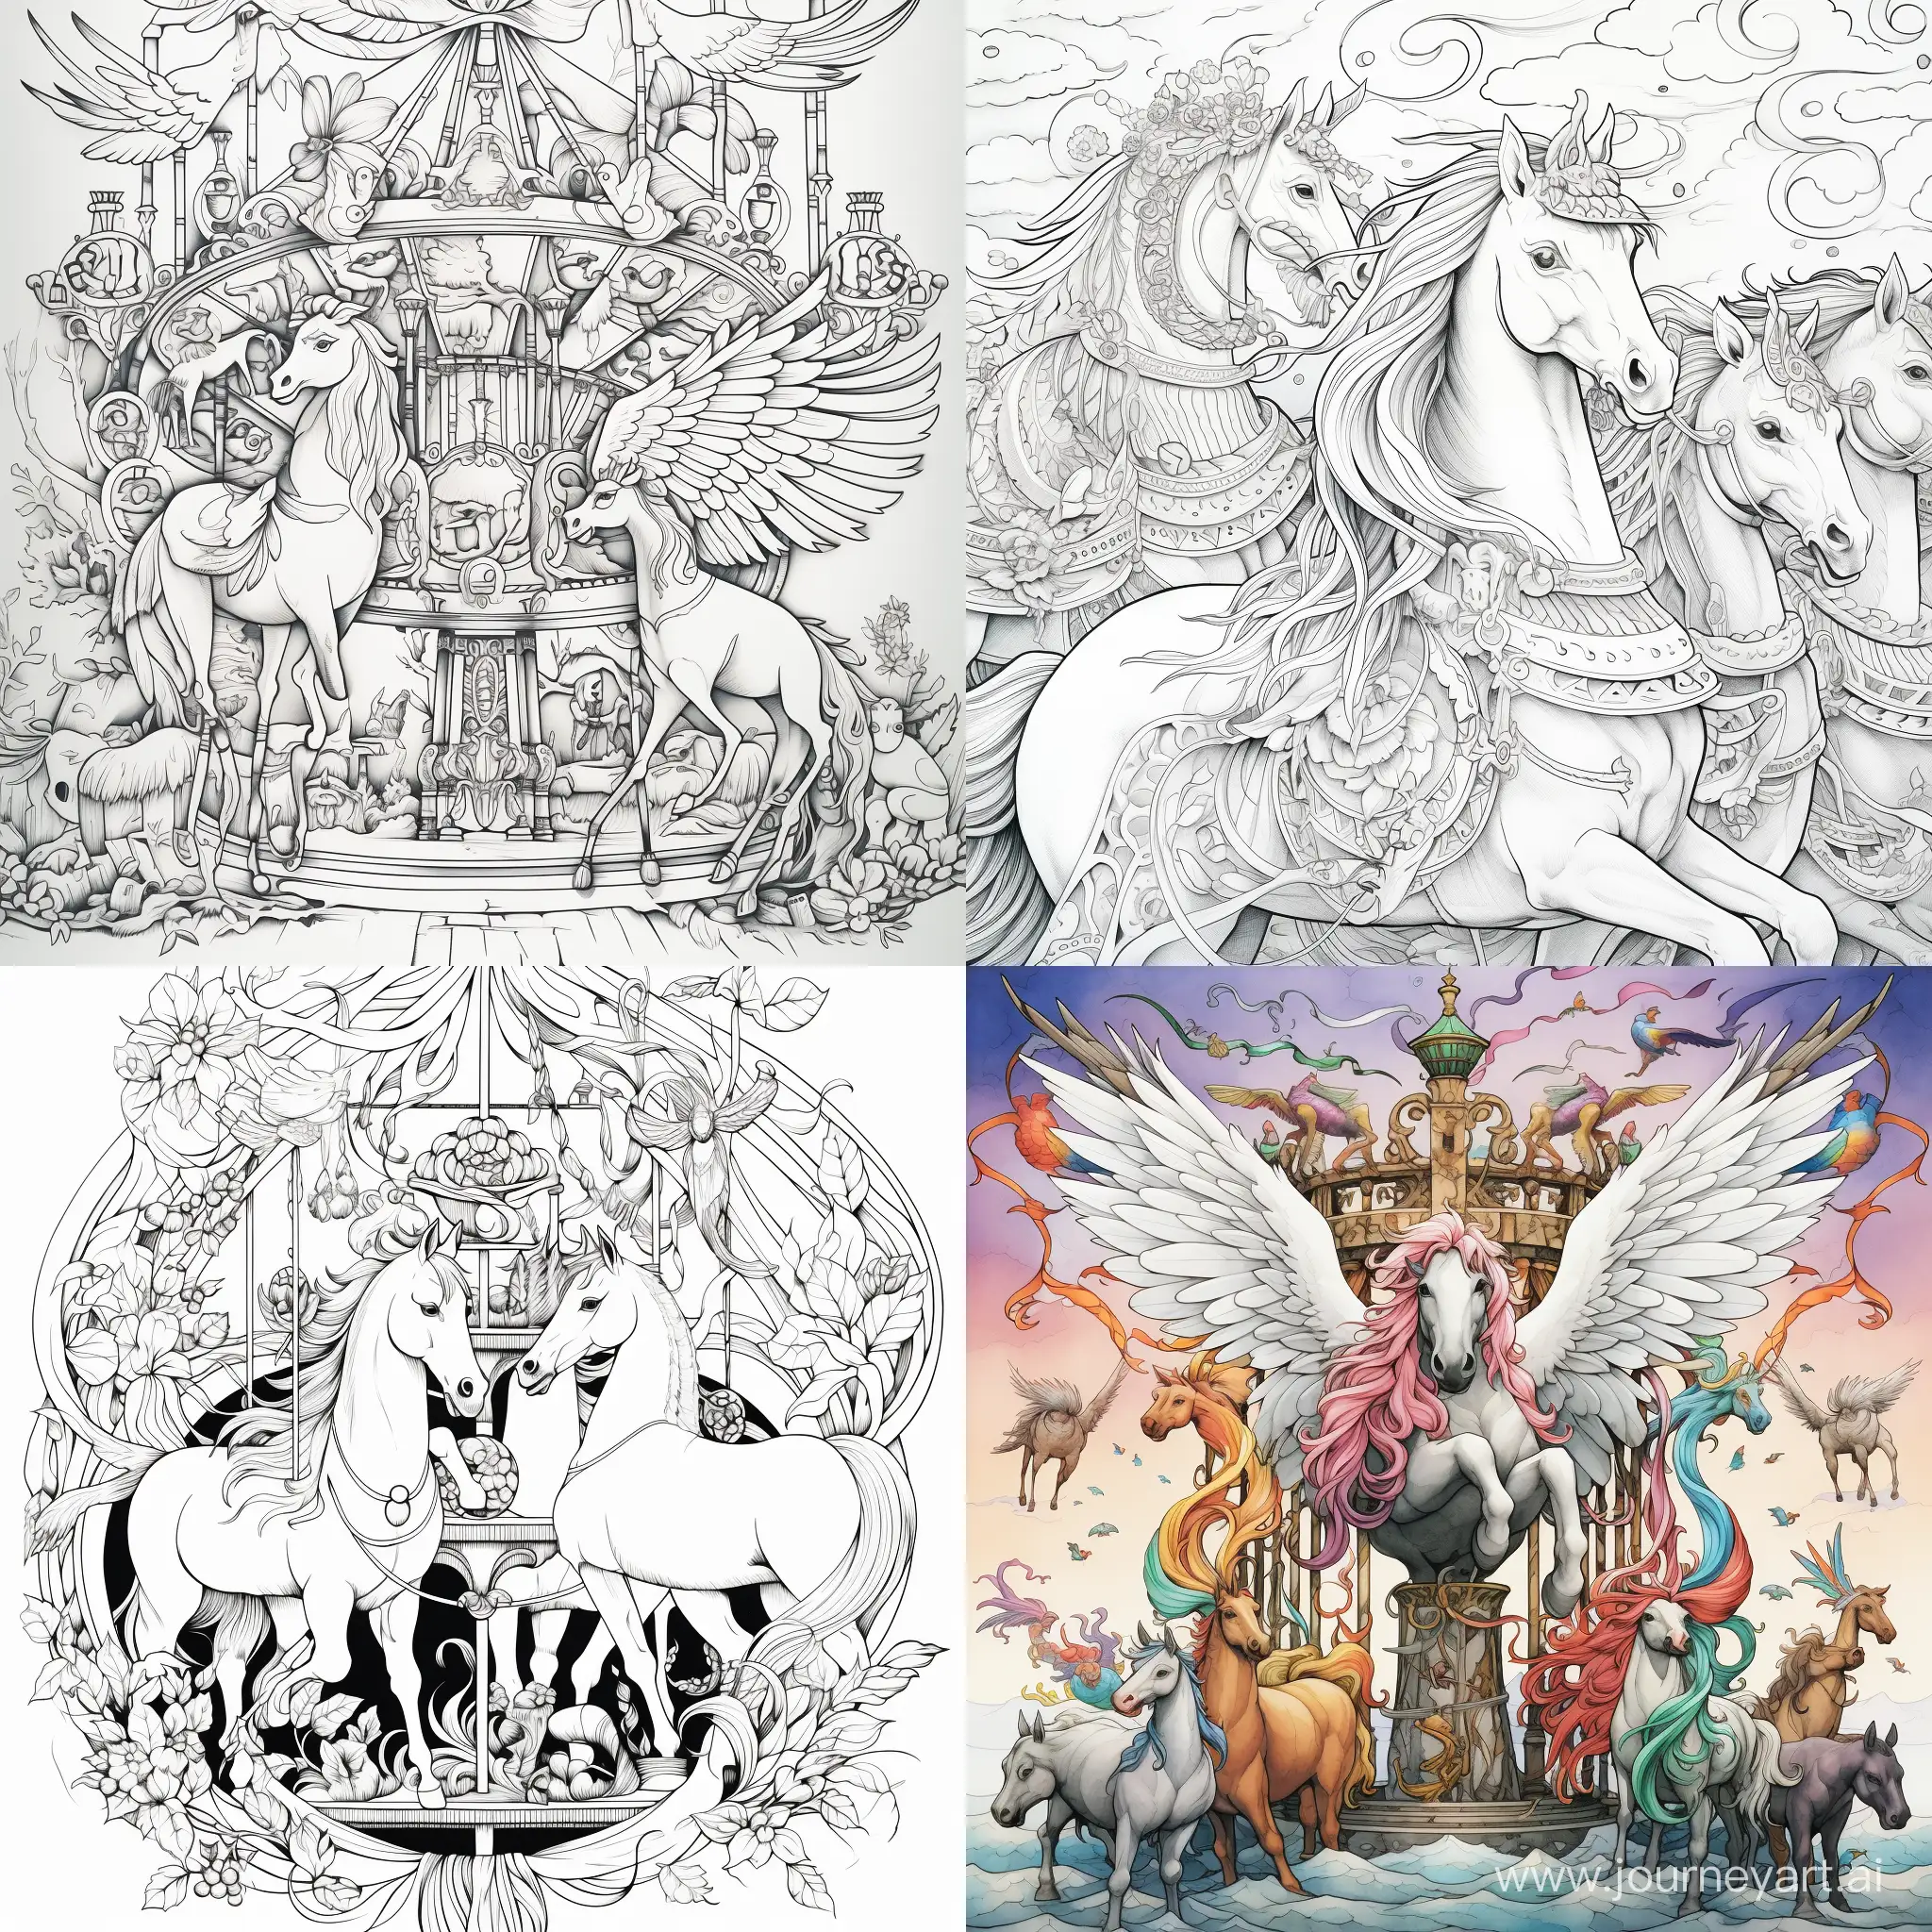 Create a simple coloring page featuring a carousel of creatures: unicorns, dragons, and griffins. Emphasize big, clear lines with no intricate details.